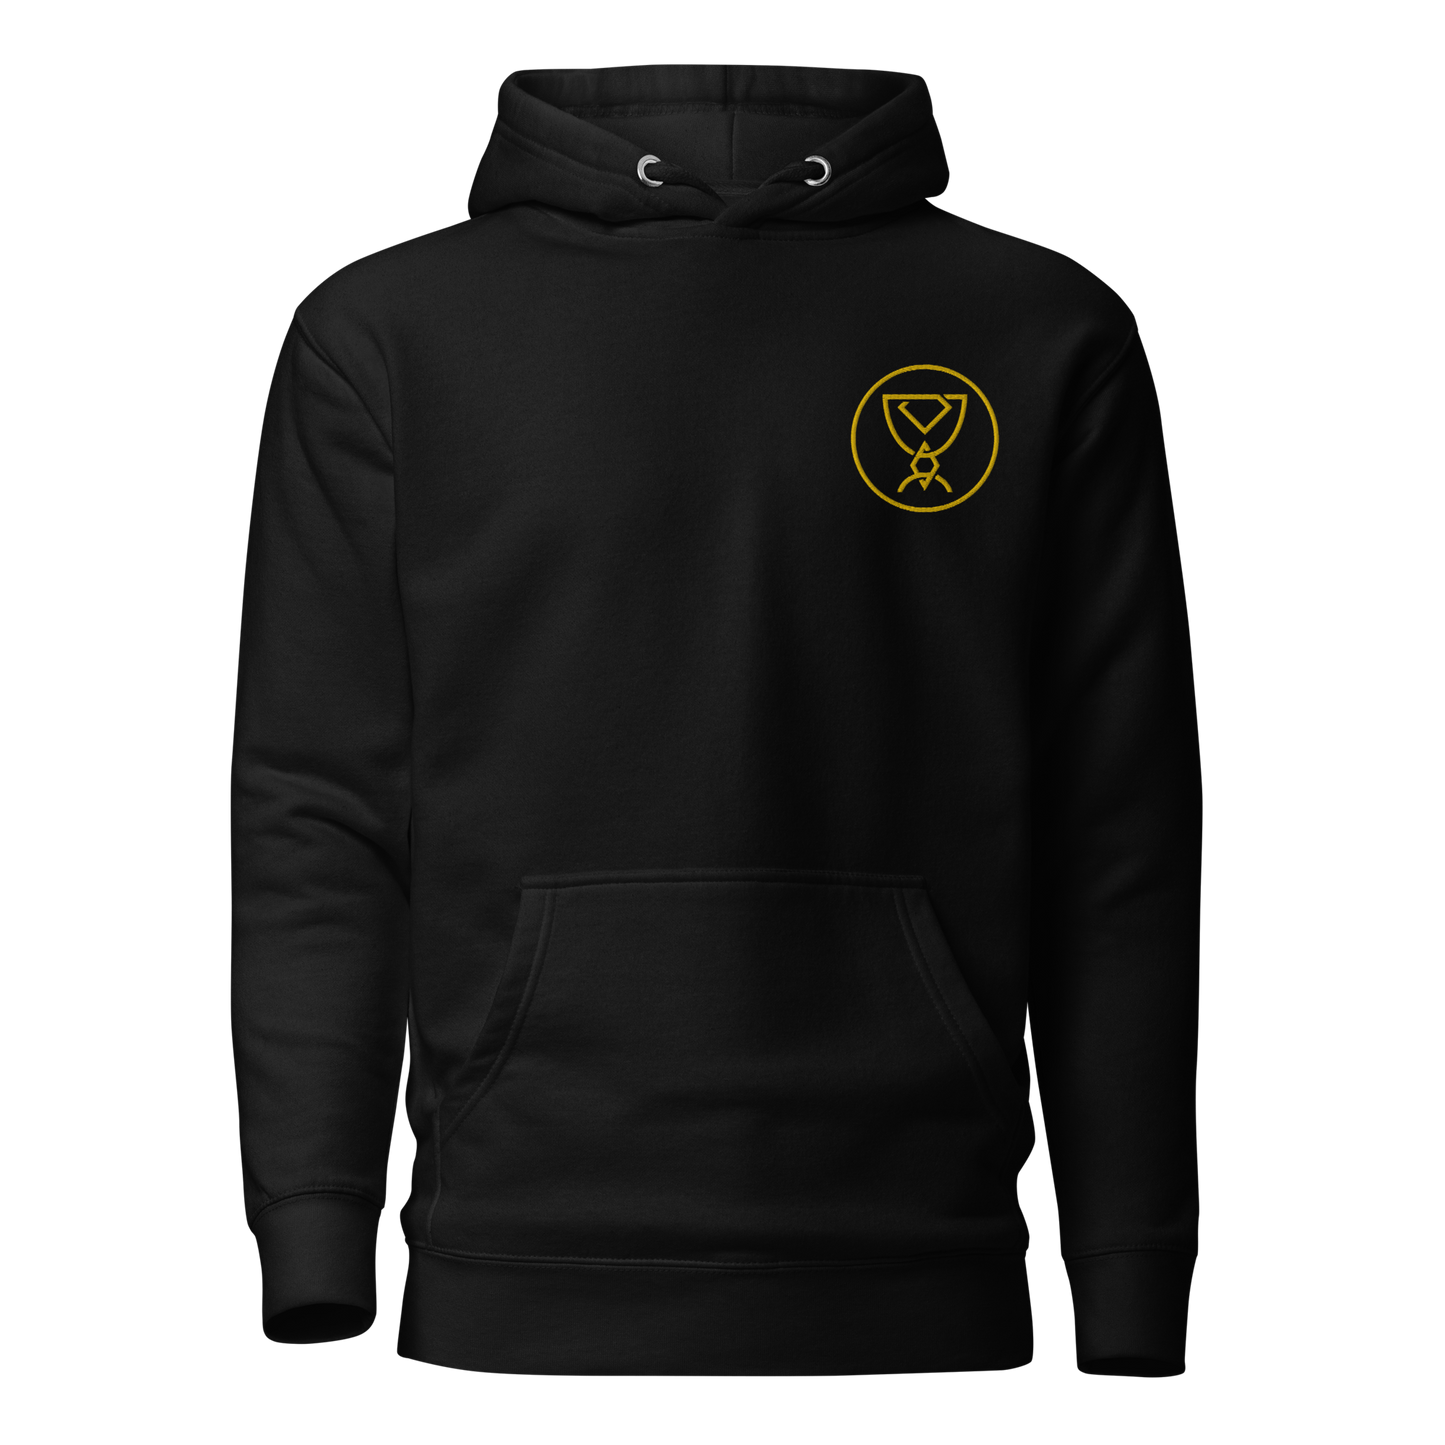 Holy Grail Embroidered Logo Unisex Hoodie